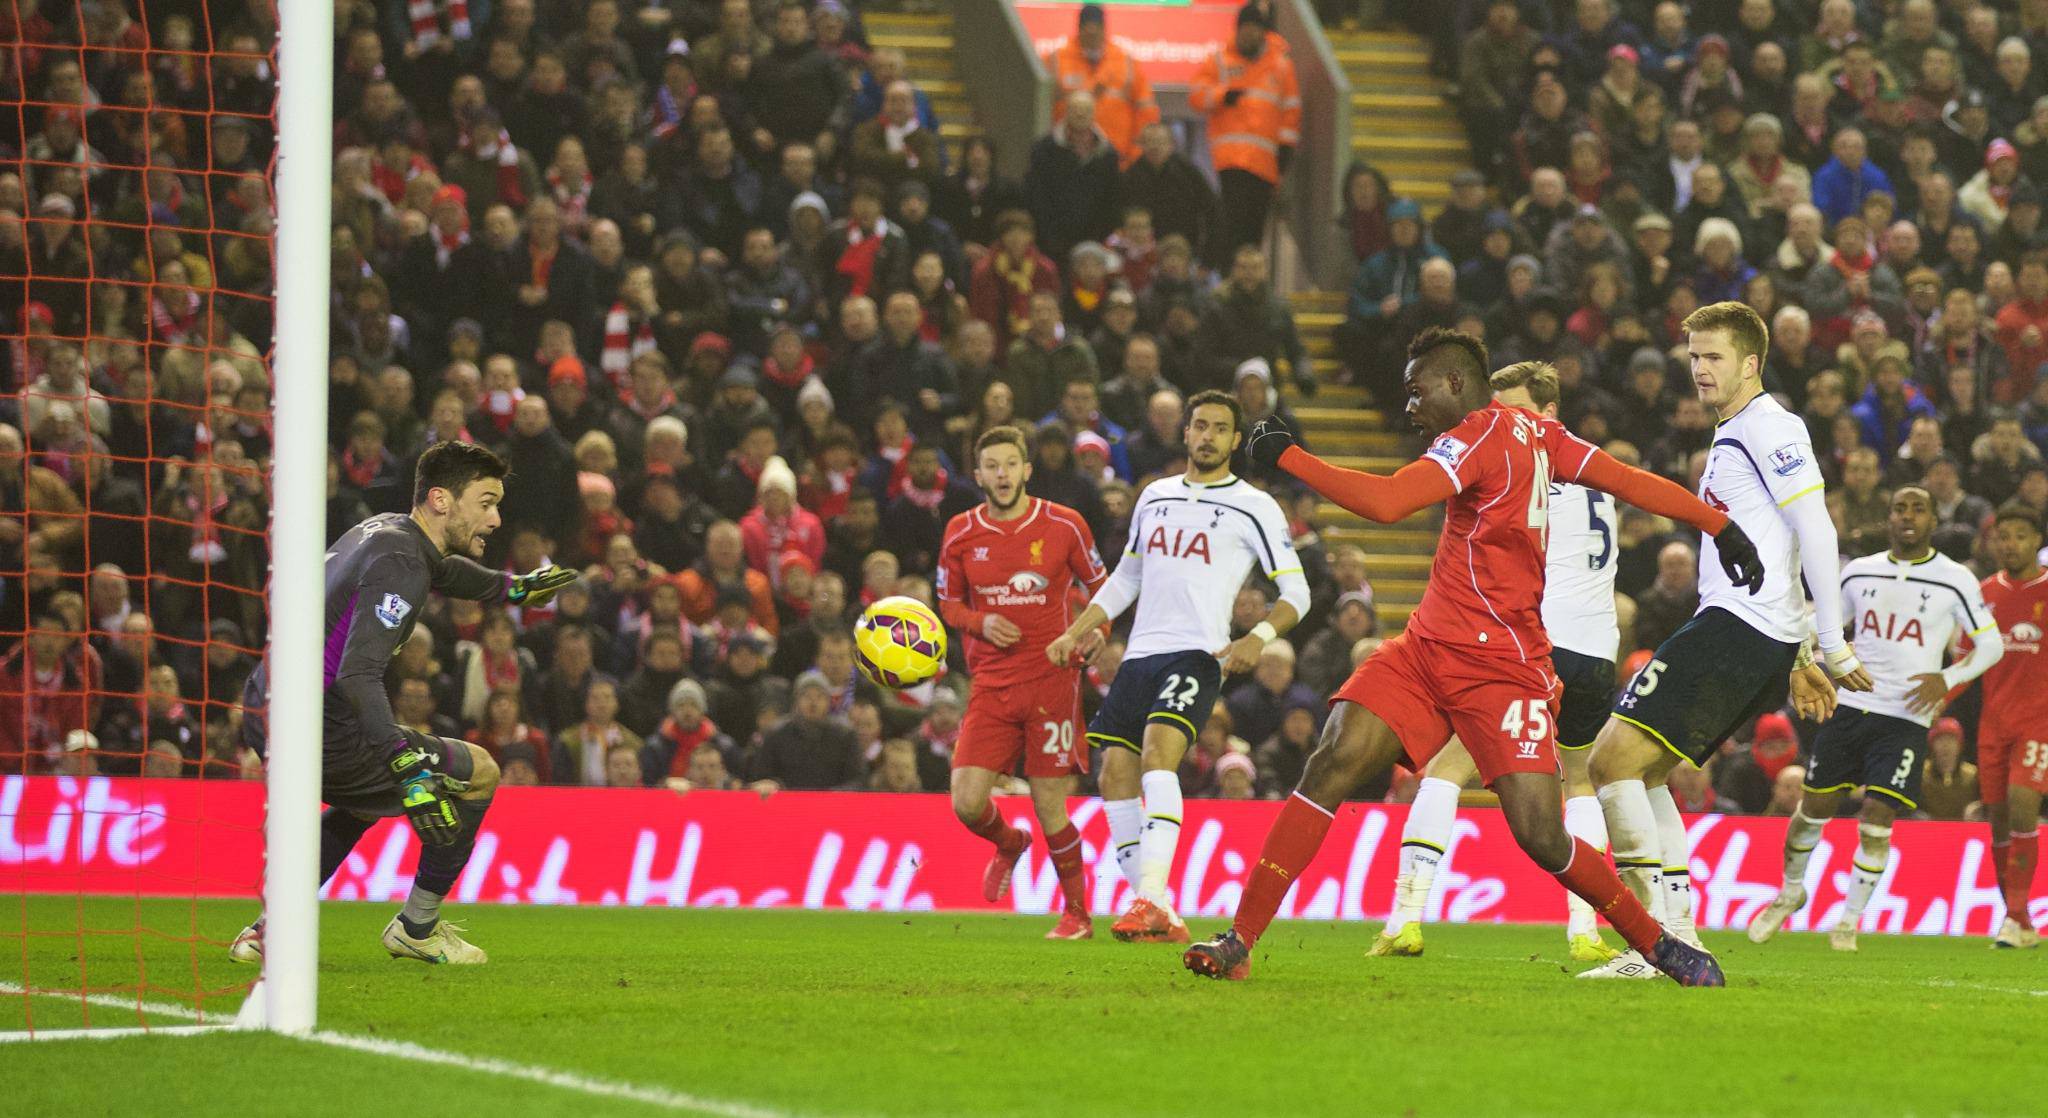 Balotelli scored his first goal for Liverpool against Tottenham in a 3-2 win in 2015